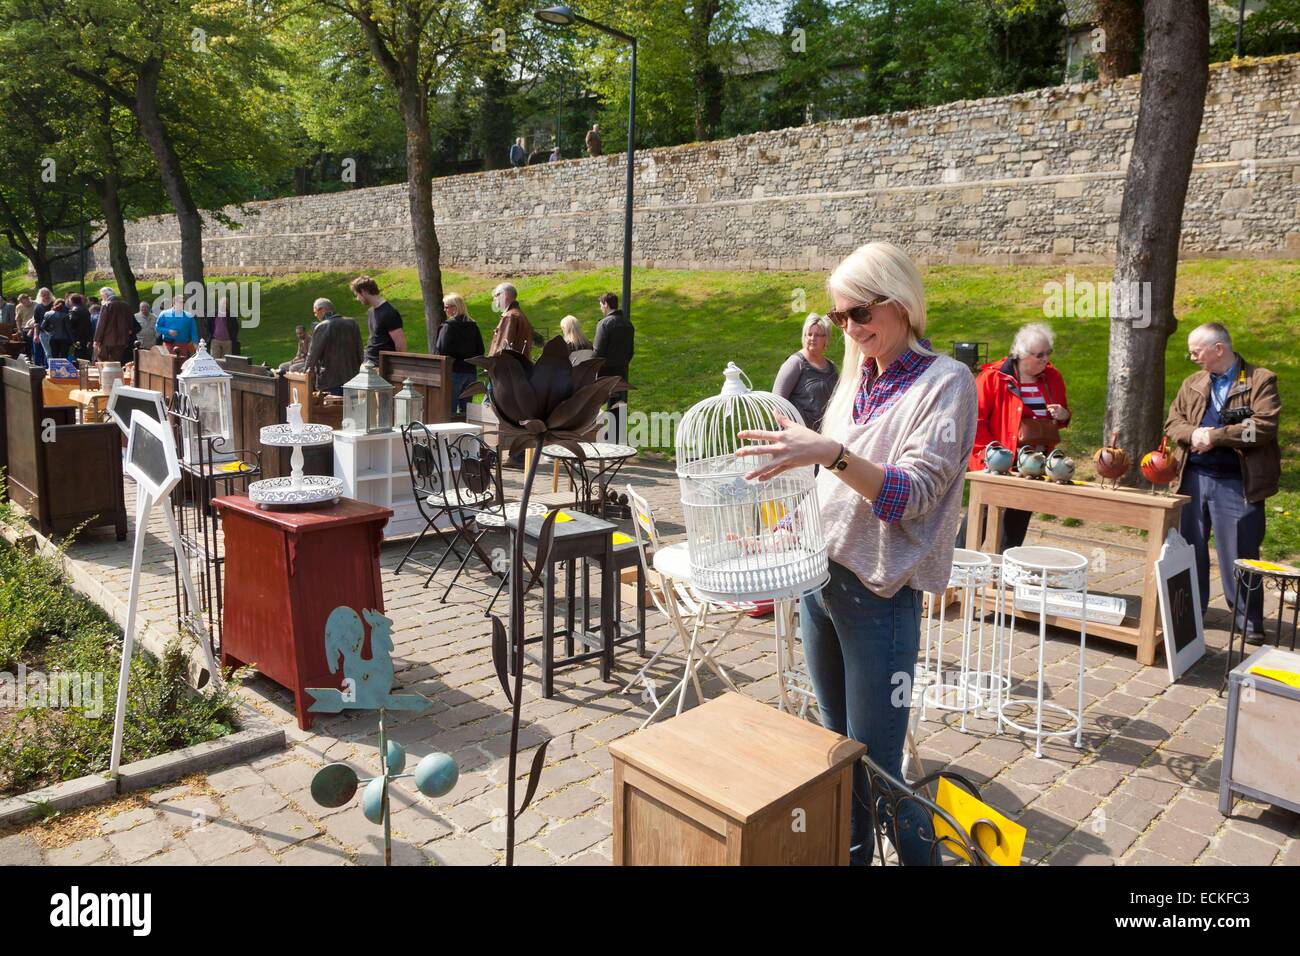 Belgium, Flanders, Limbourg Province, historic city of Tongeren (Tongres), antique flea market at the foot of the medieval ramparts, woman looking at a bird cage Stock Photo